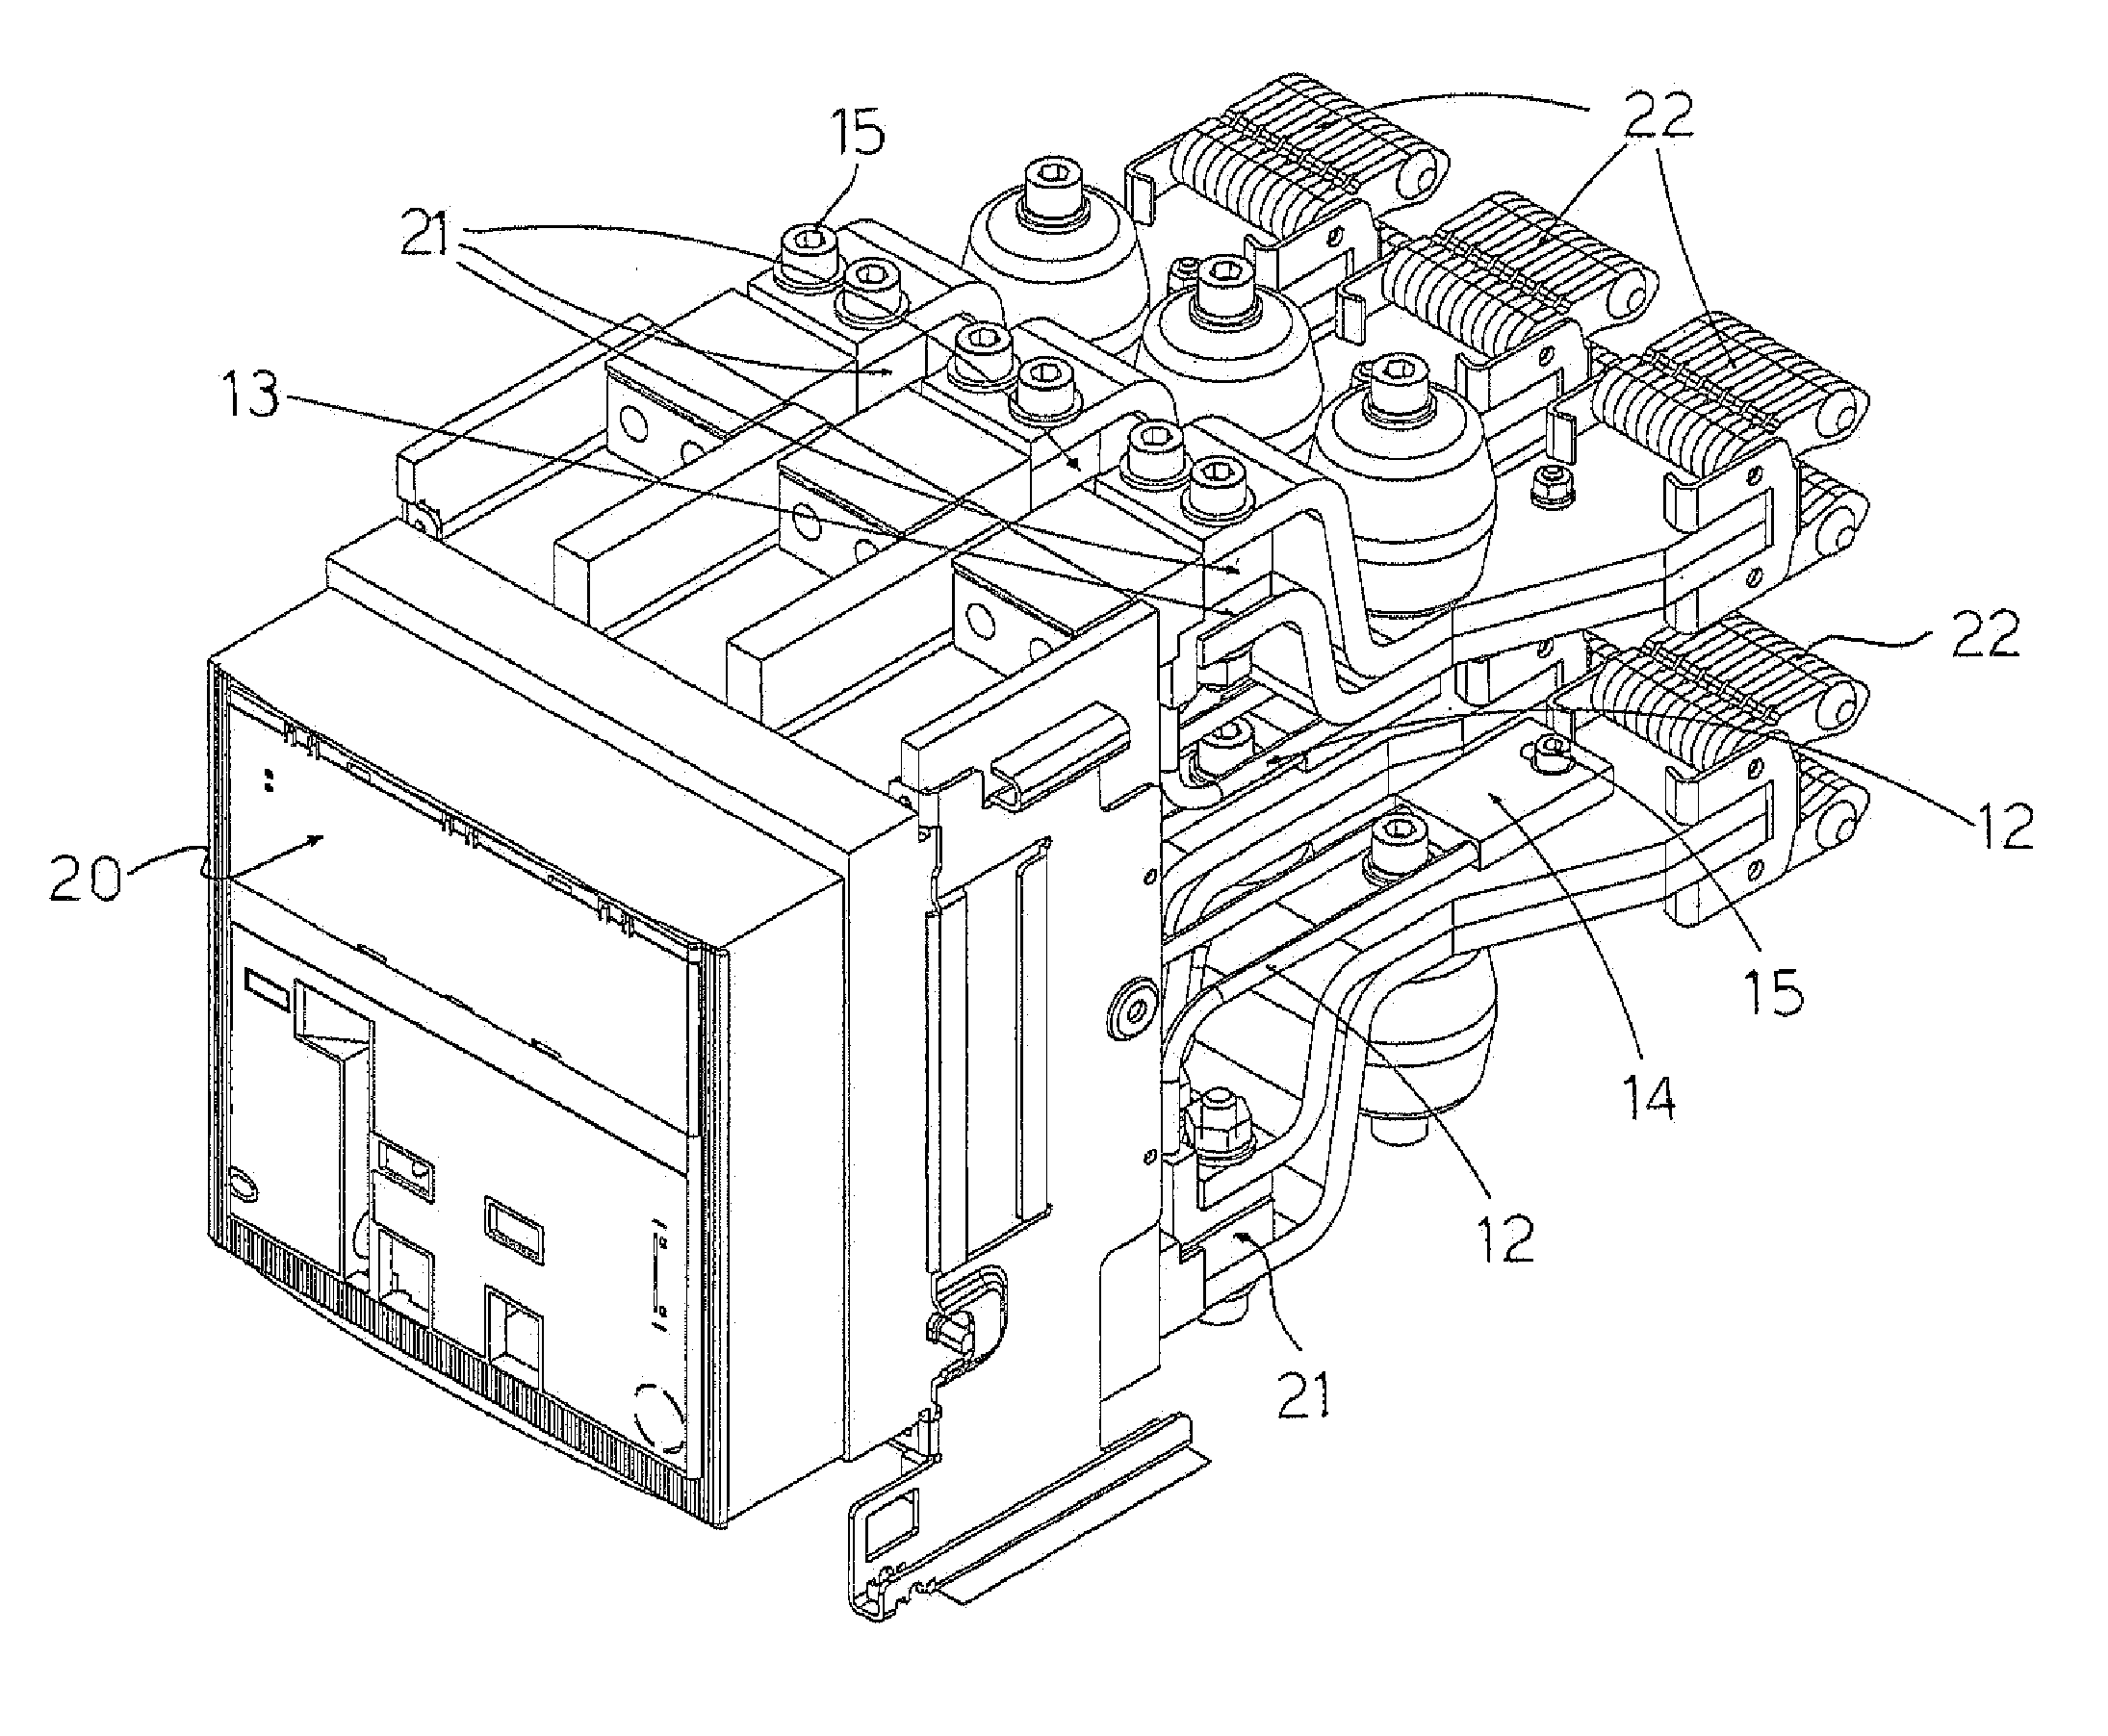 Device for connecting an electric line to a circuit breaker